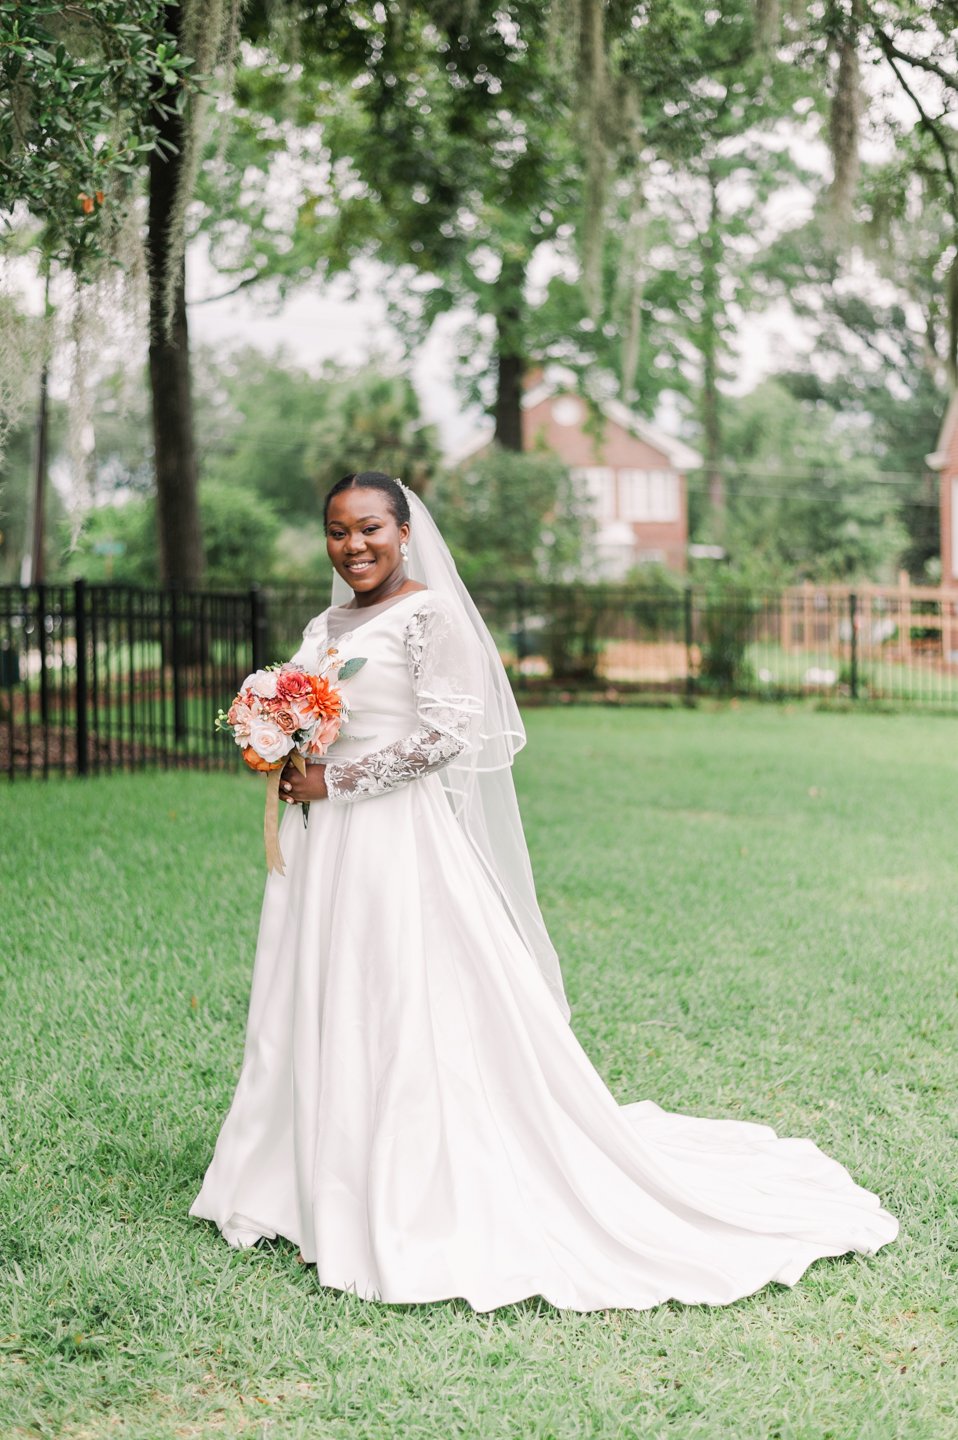 Tallahassee Wedding Photography - Chelsey Nelson Photography-13.jpg